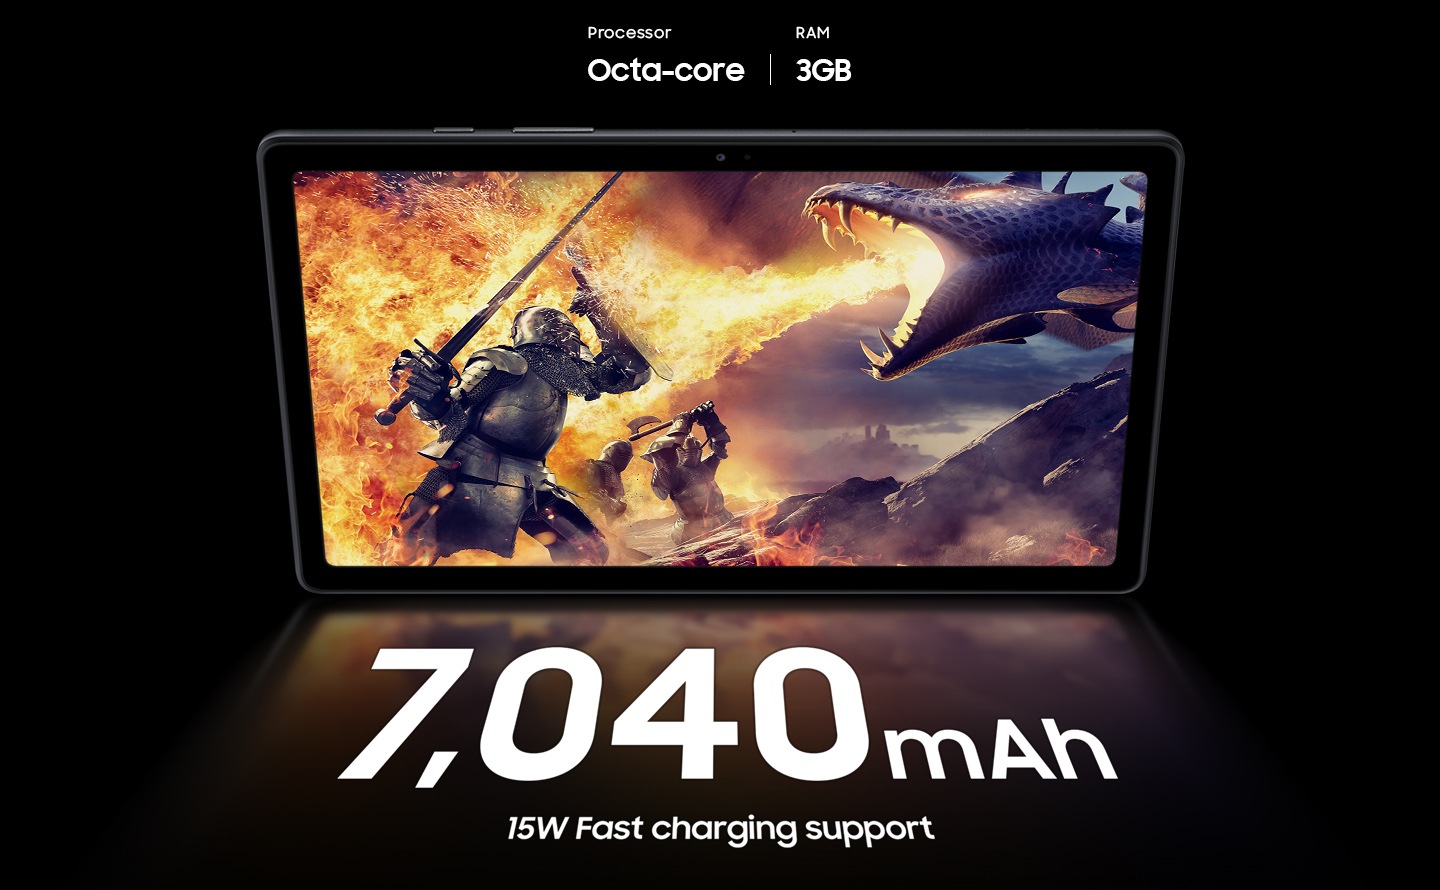 A scene from an action-adventure game is displayed on Galaxy Tab A7 with the texts Octa-core processor and 3GB RAM above it.